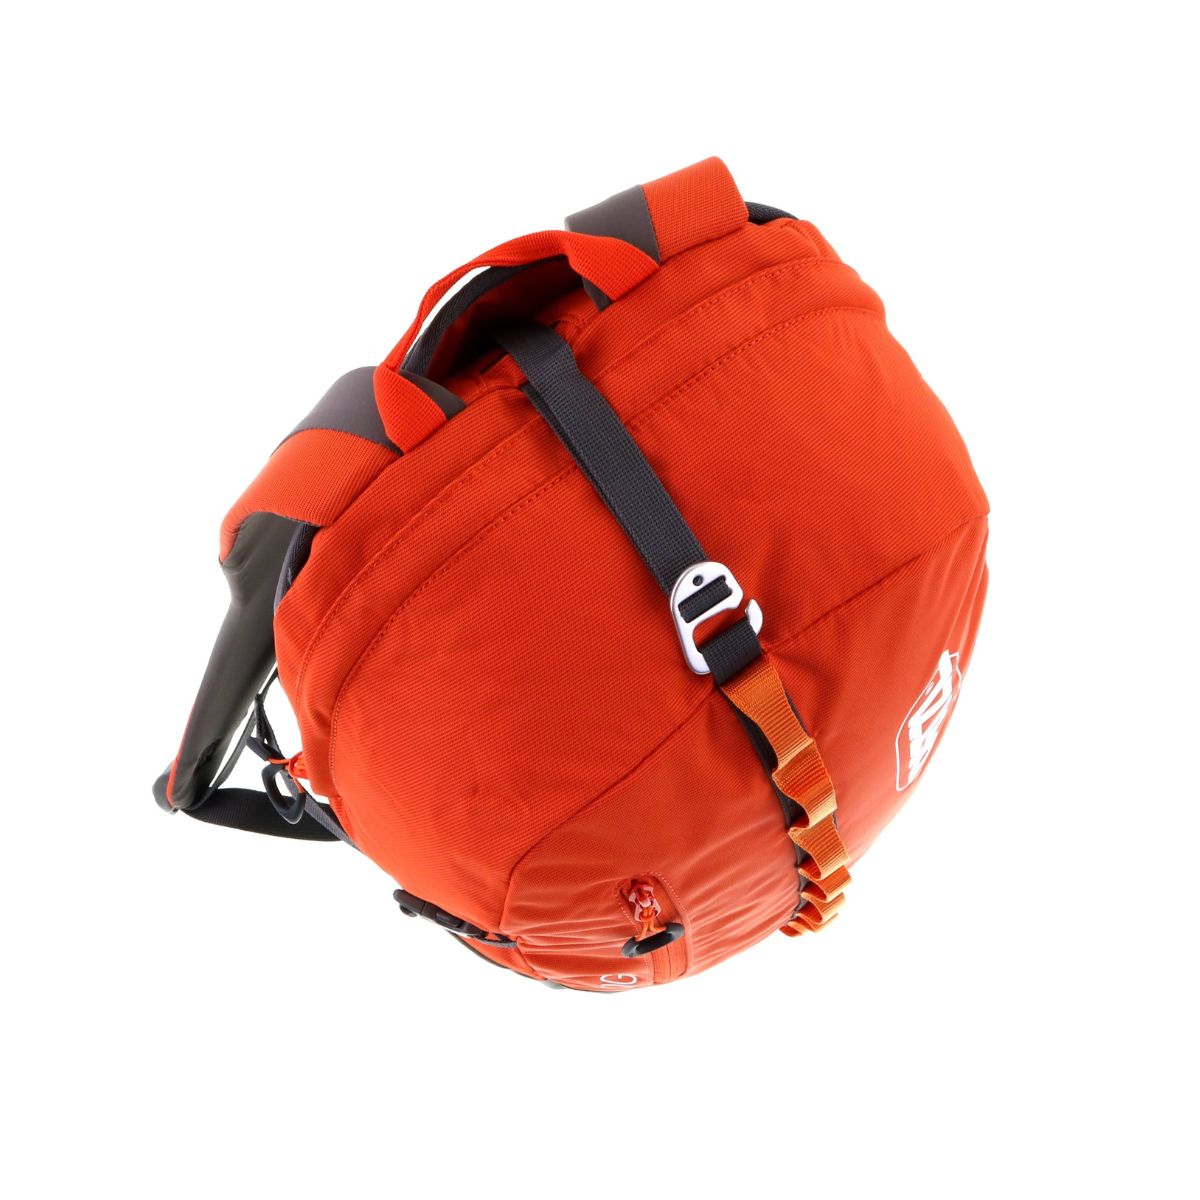 Bug Backpack for Single-day Multi-pitch Climbing - Red/Orange